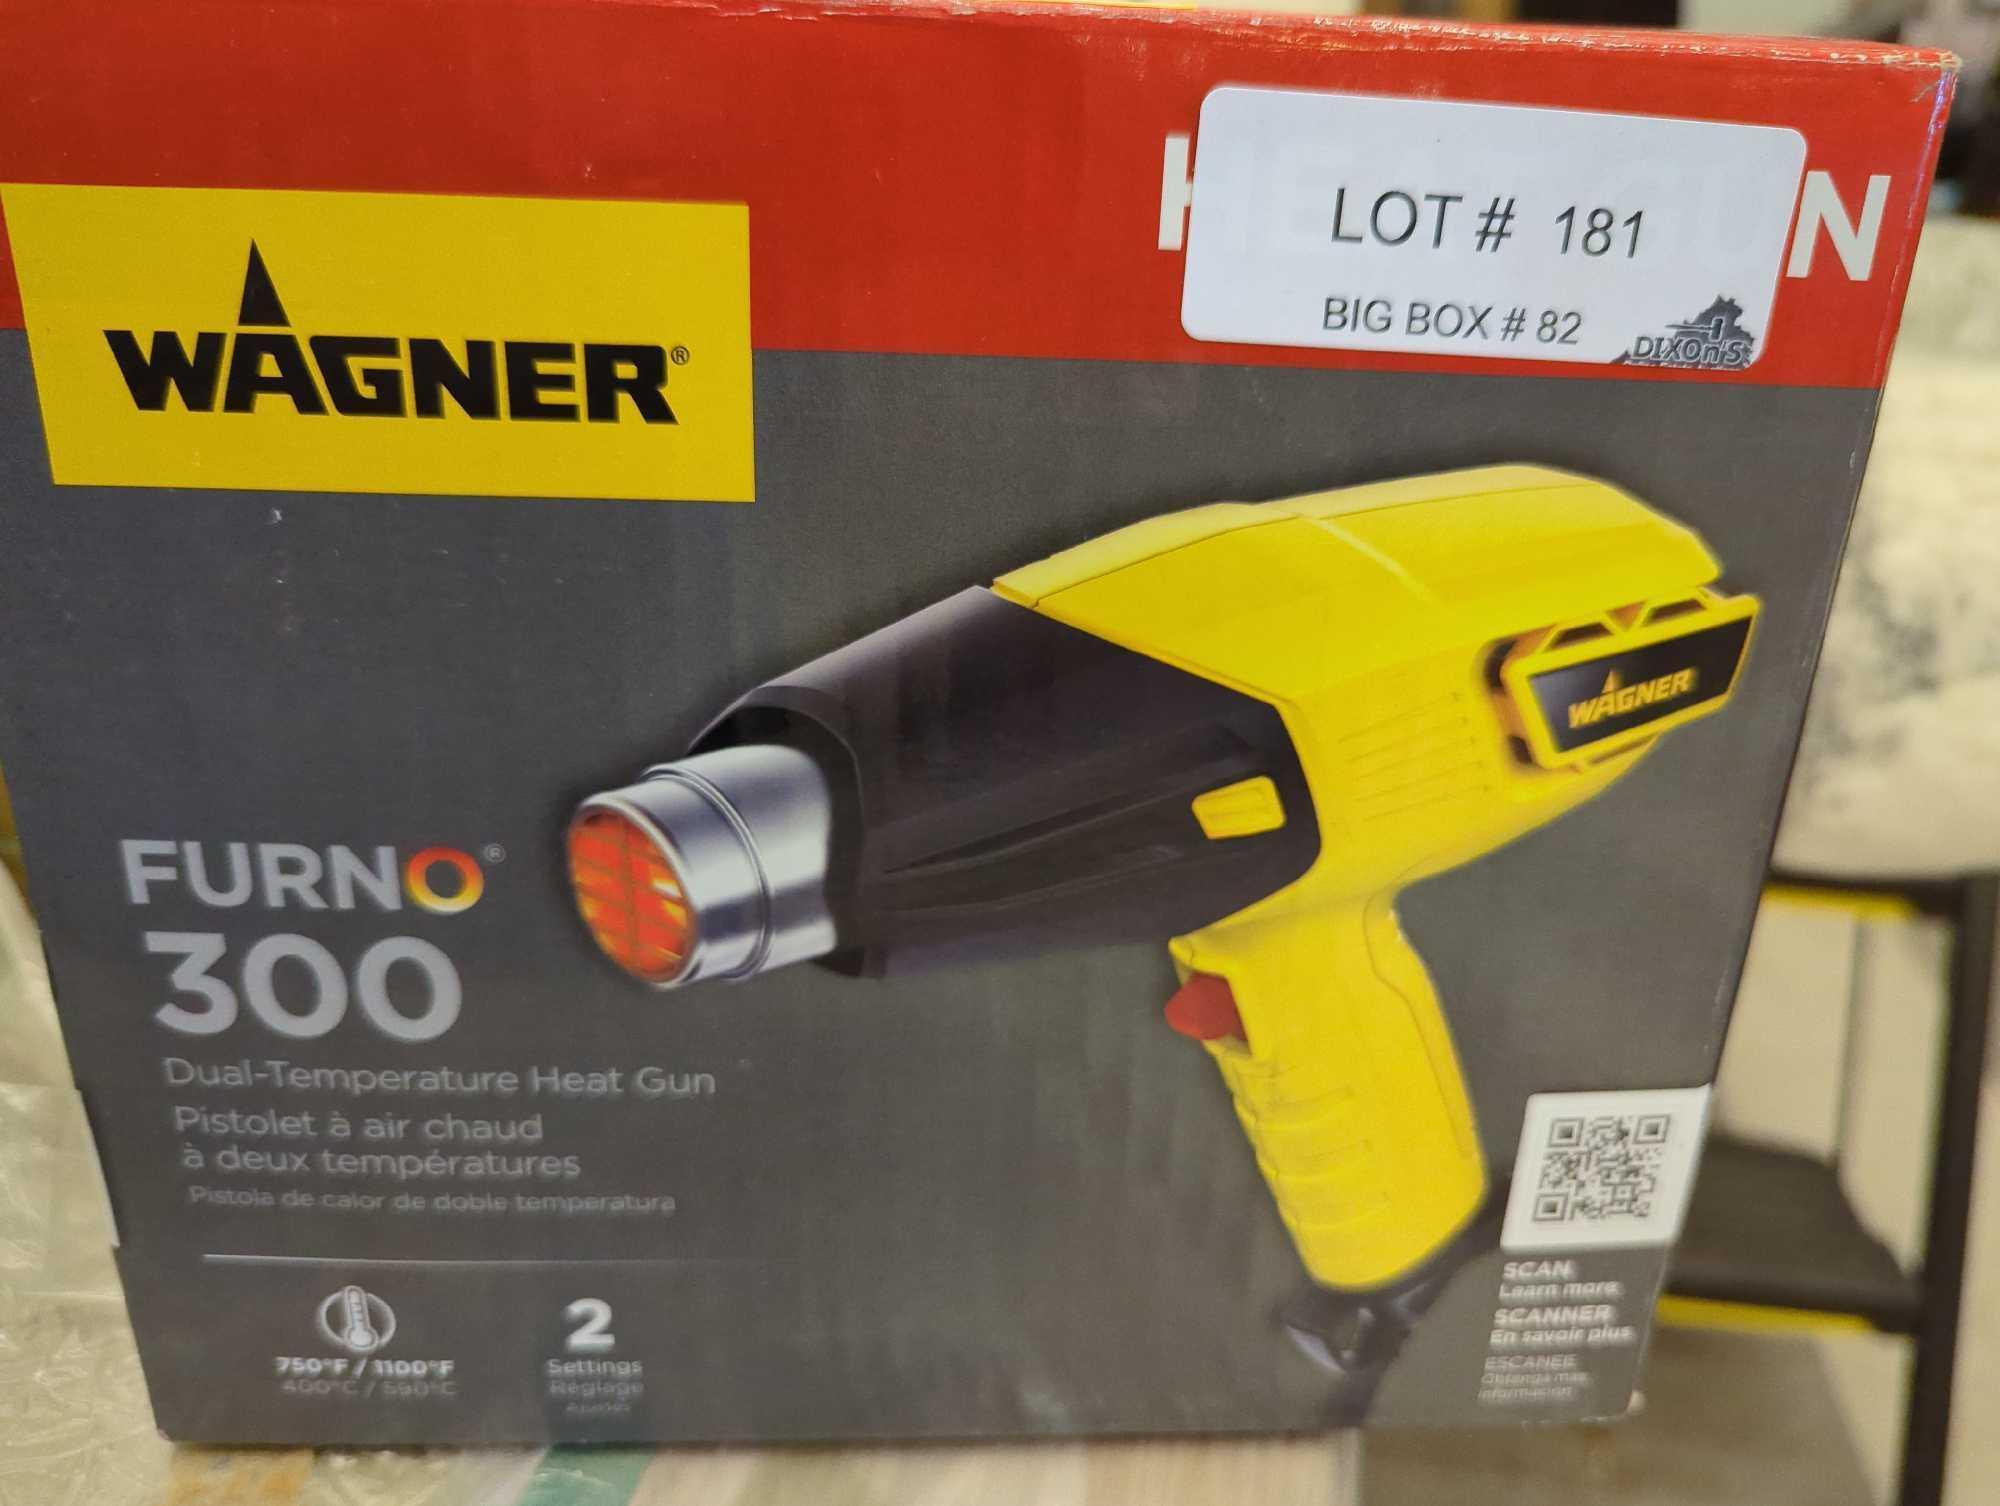 Wagner Furno 300 Dual Tempurature Corded Heat Gun, Appears to be New Retail Price Value $26, Tested